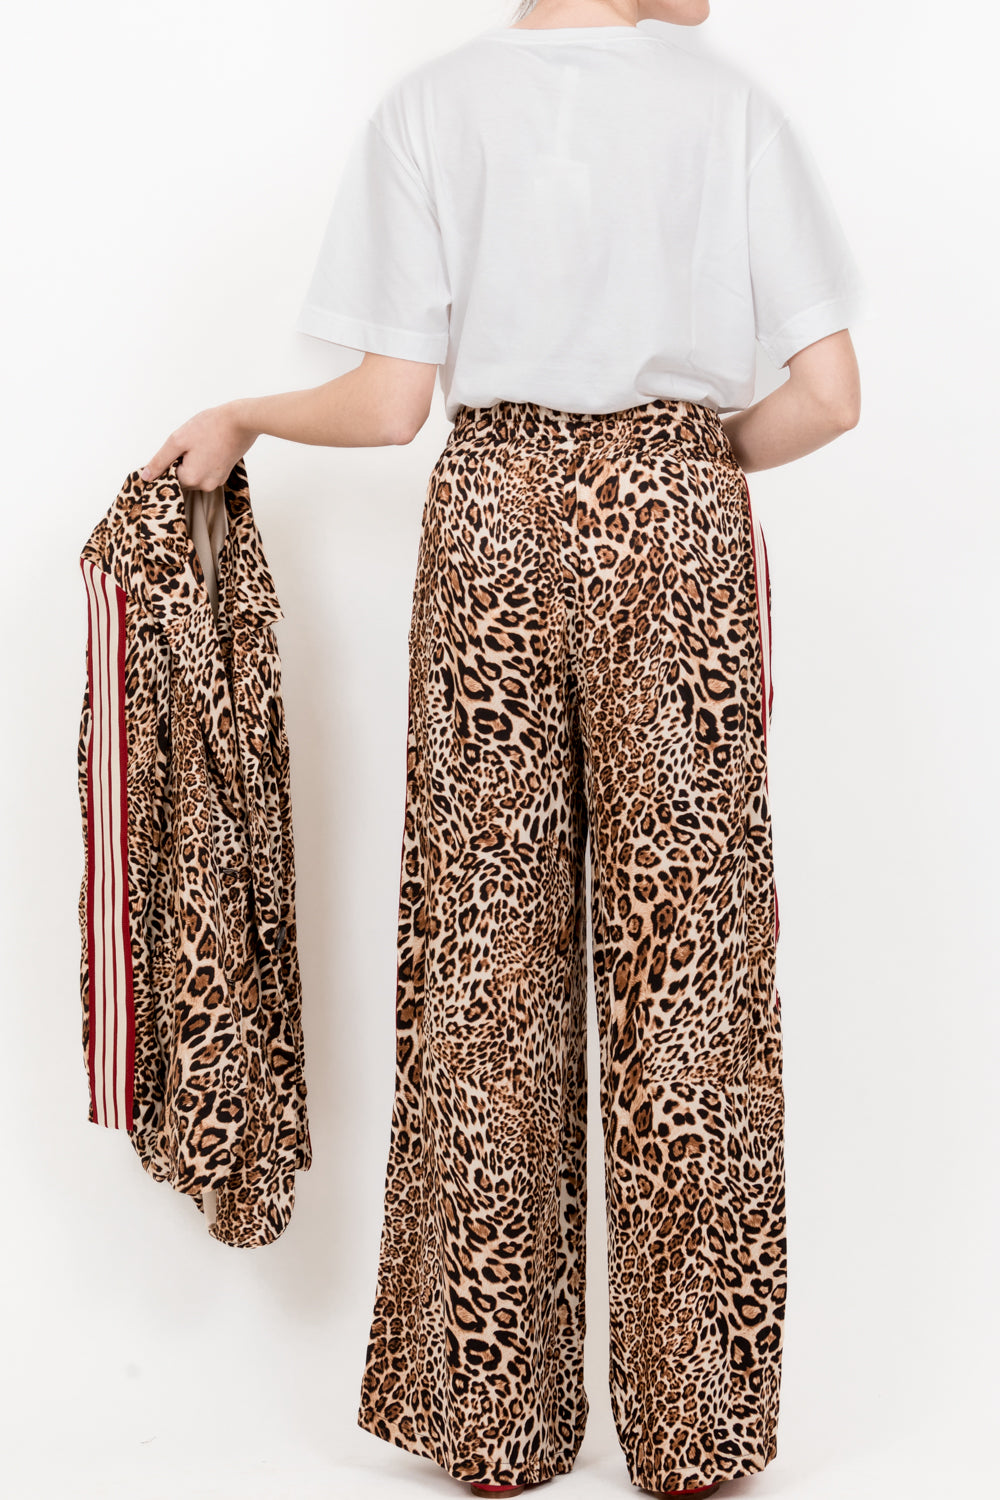 Tensione In - Pantalone animalier coulisse banda laterale contrasto Art. 33577